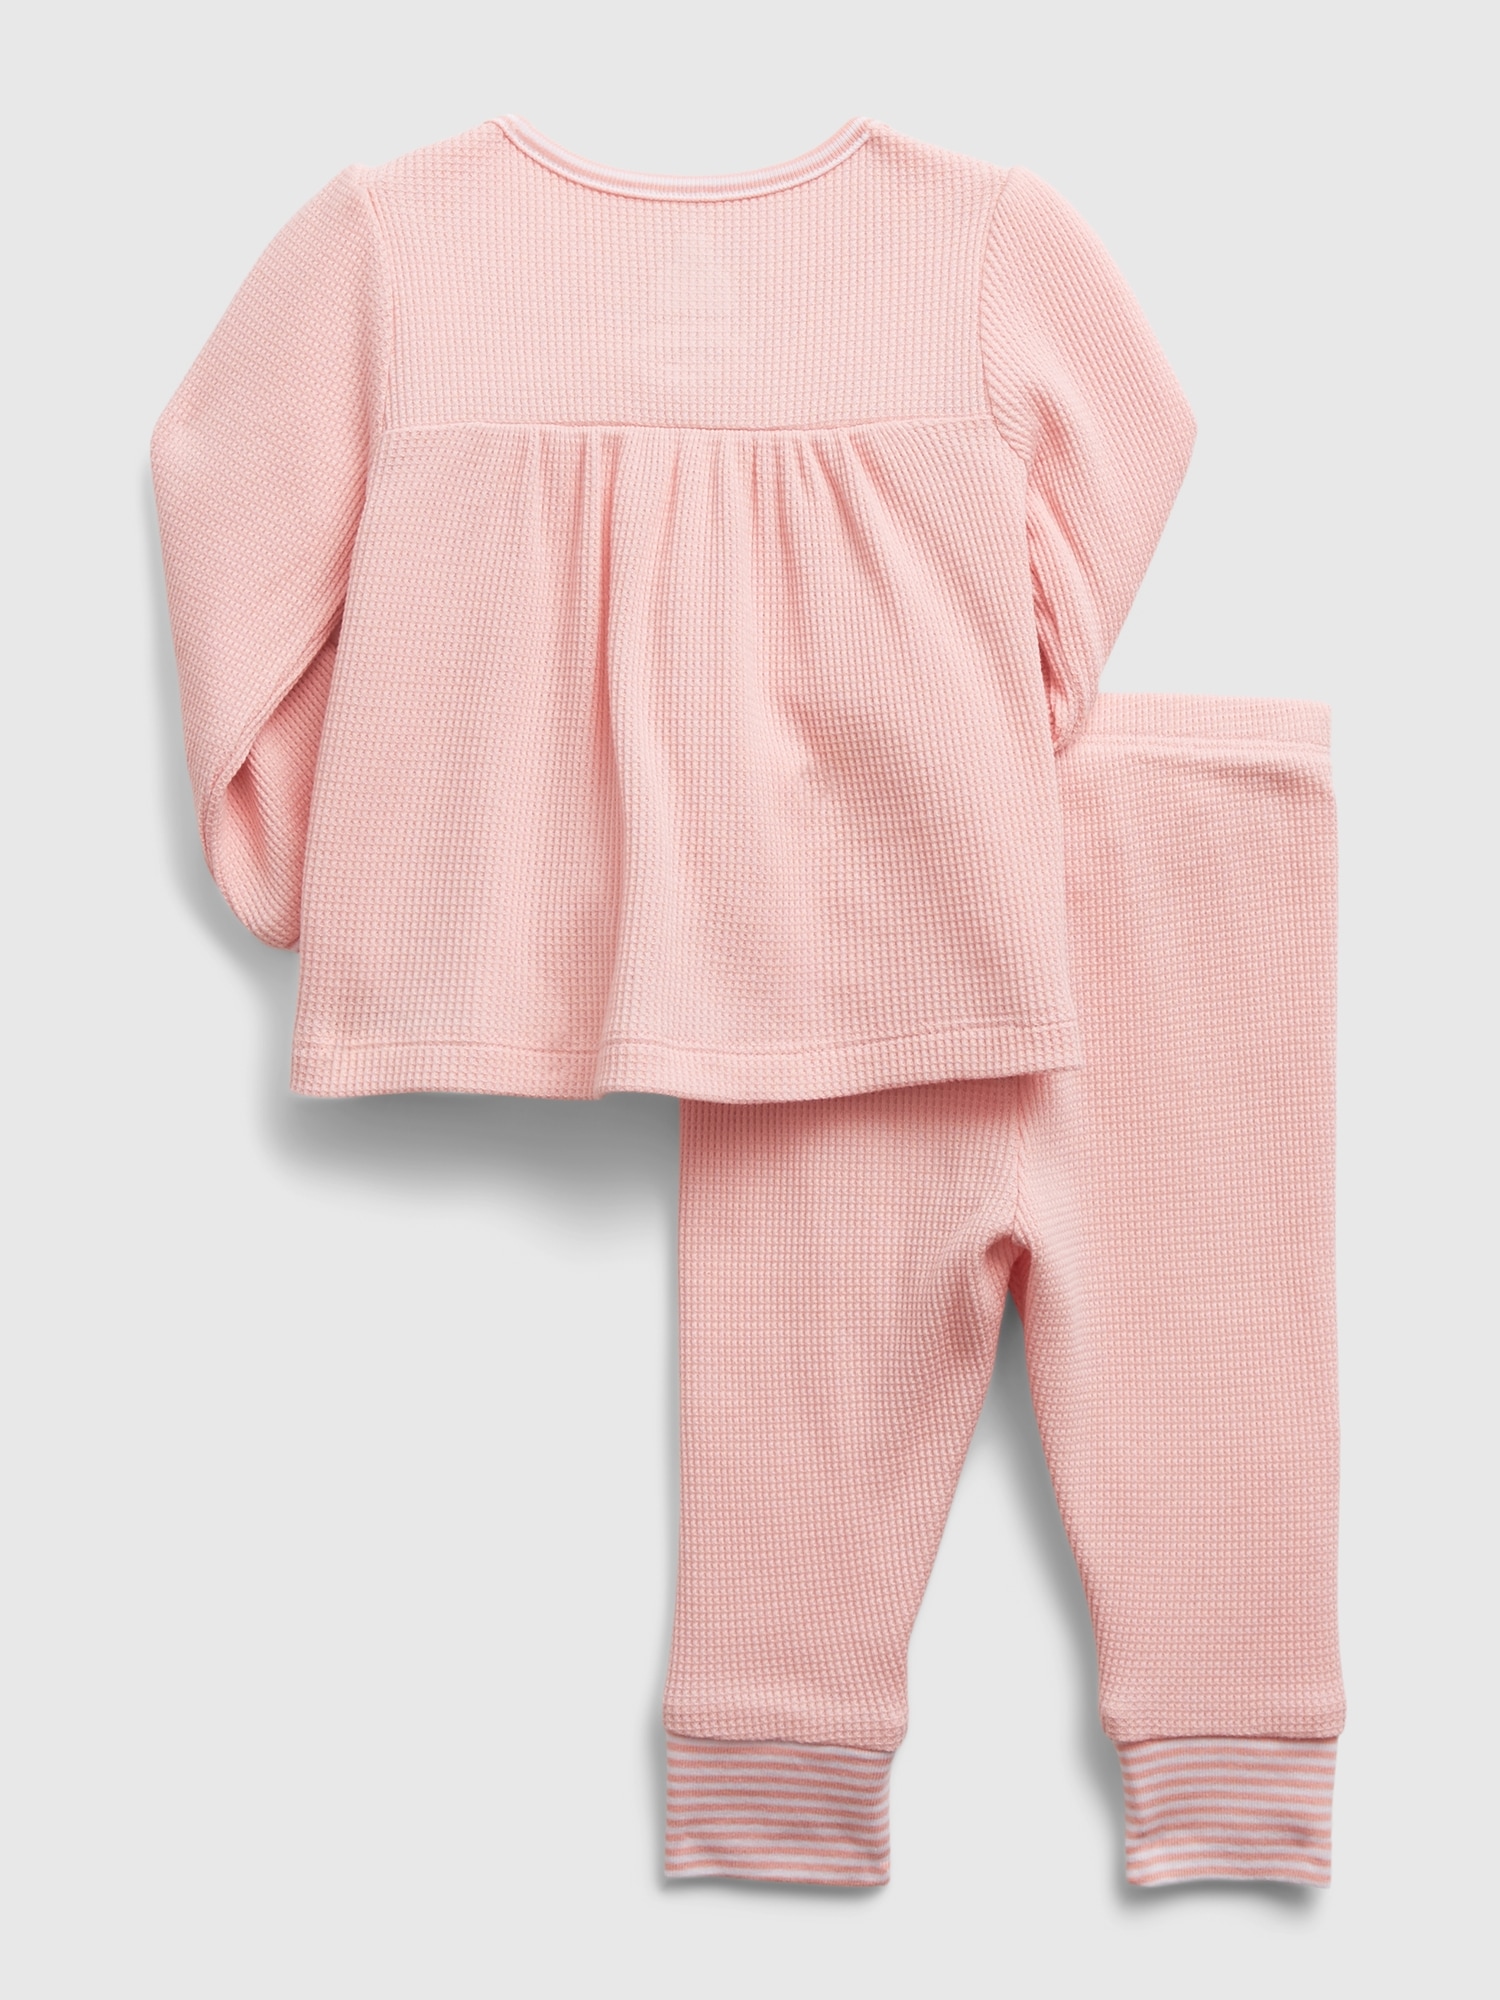 Baby Outfit Set | Gap